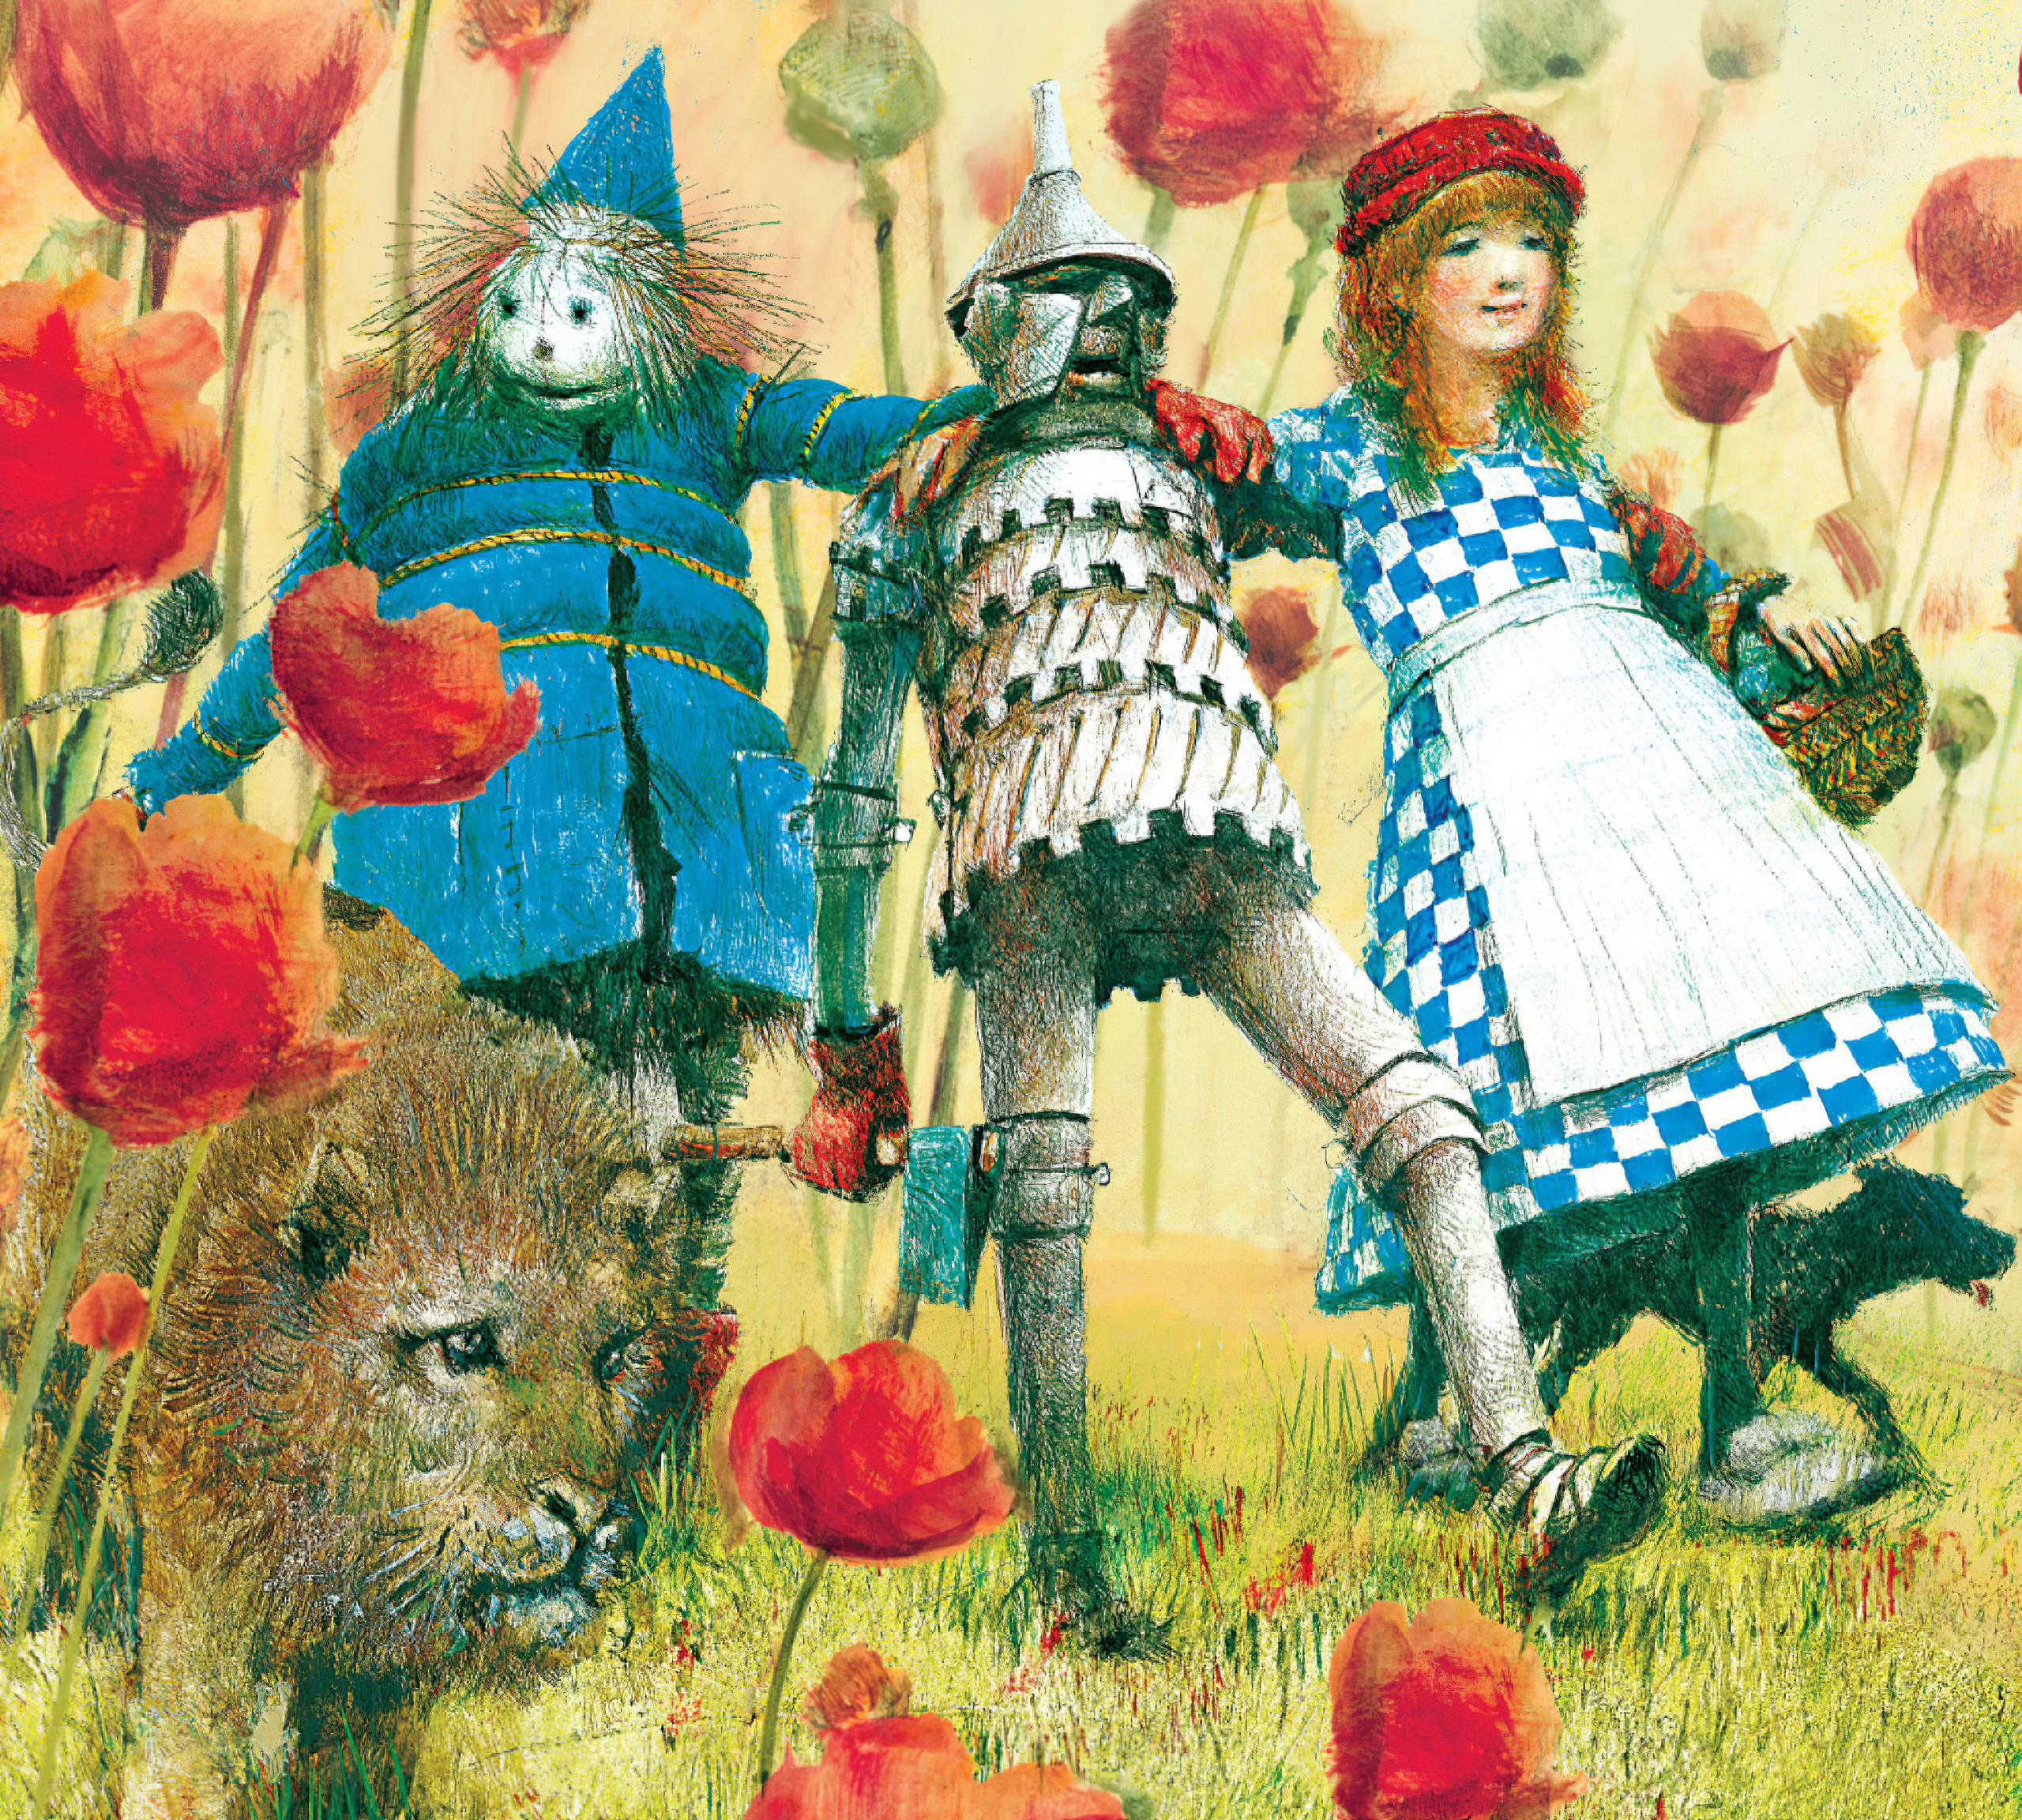 Book The Wonderful Wizard of Oz